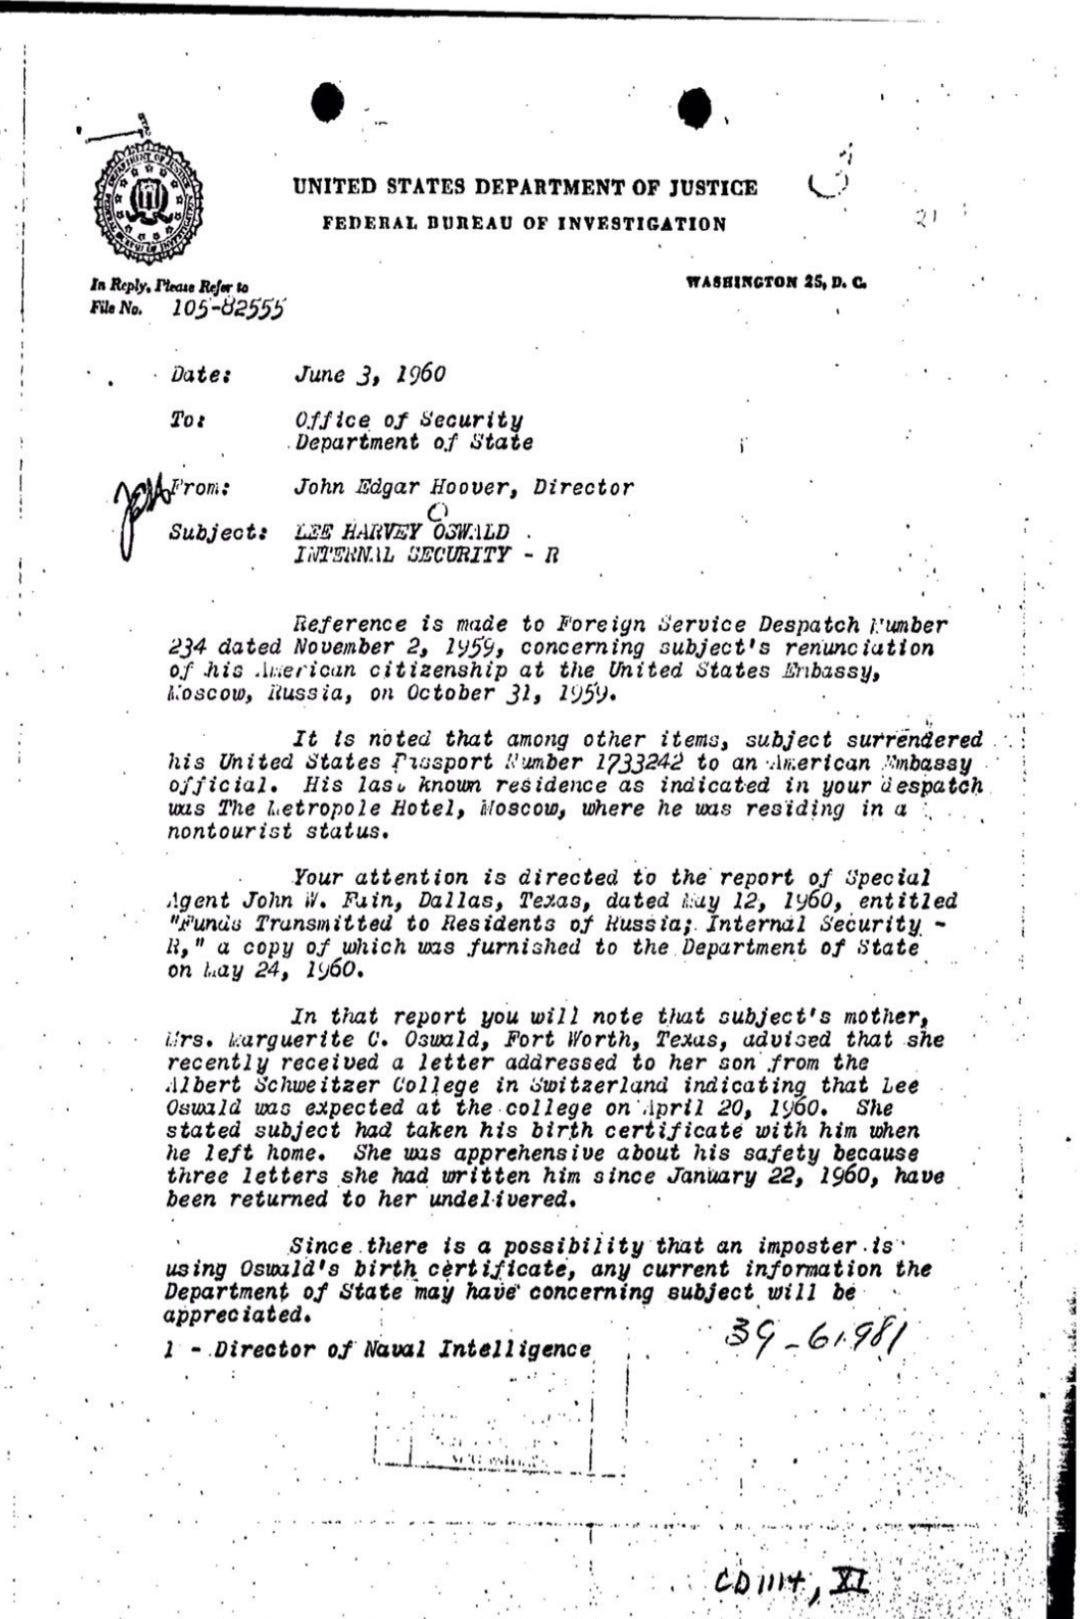 J. Edgar Hoover memo of 6/3/60 to the State Department and Naval Intelligence concerning "a possibility that an imposter is using Oswald's birth certificate."